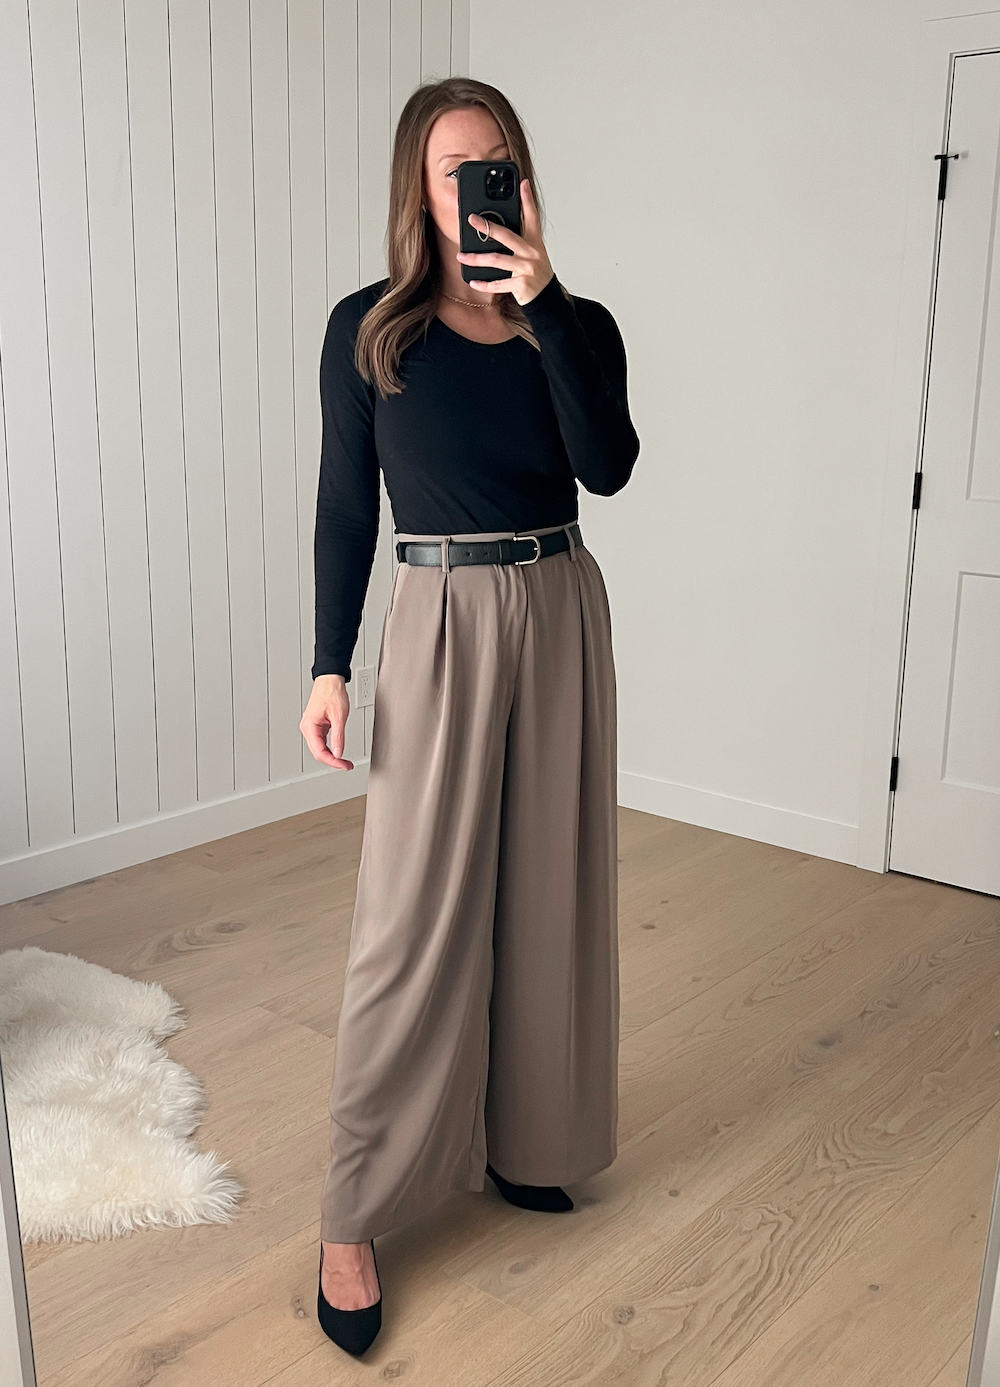 Christal wearing the wide-leg taupe pants with a black long-sleeved top and a black belt with black pumps